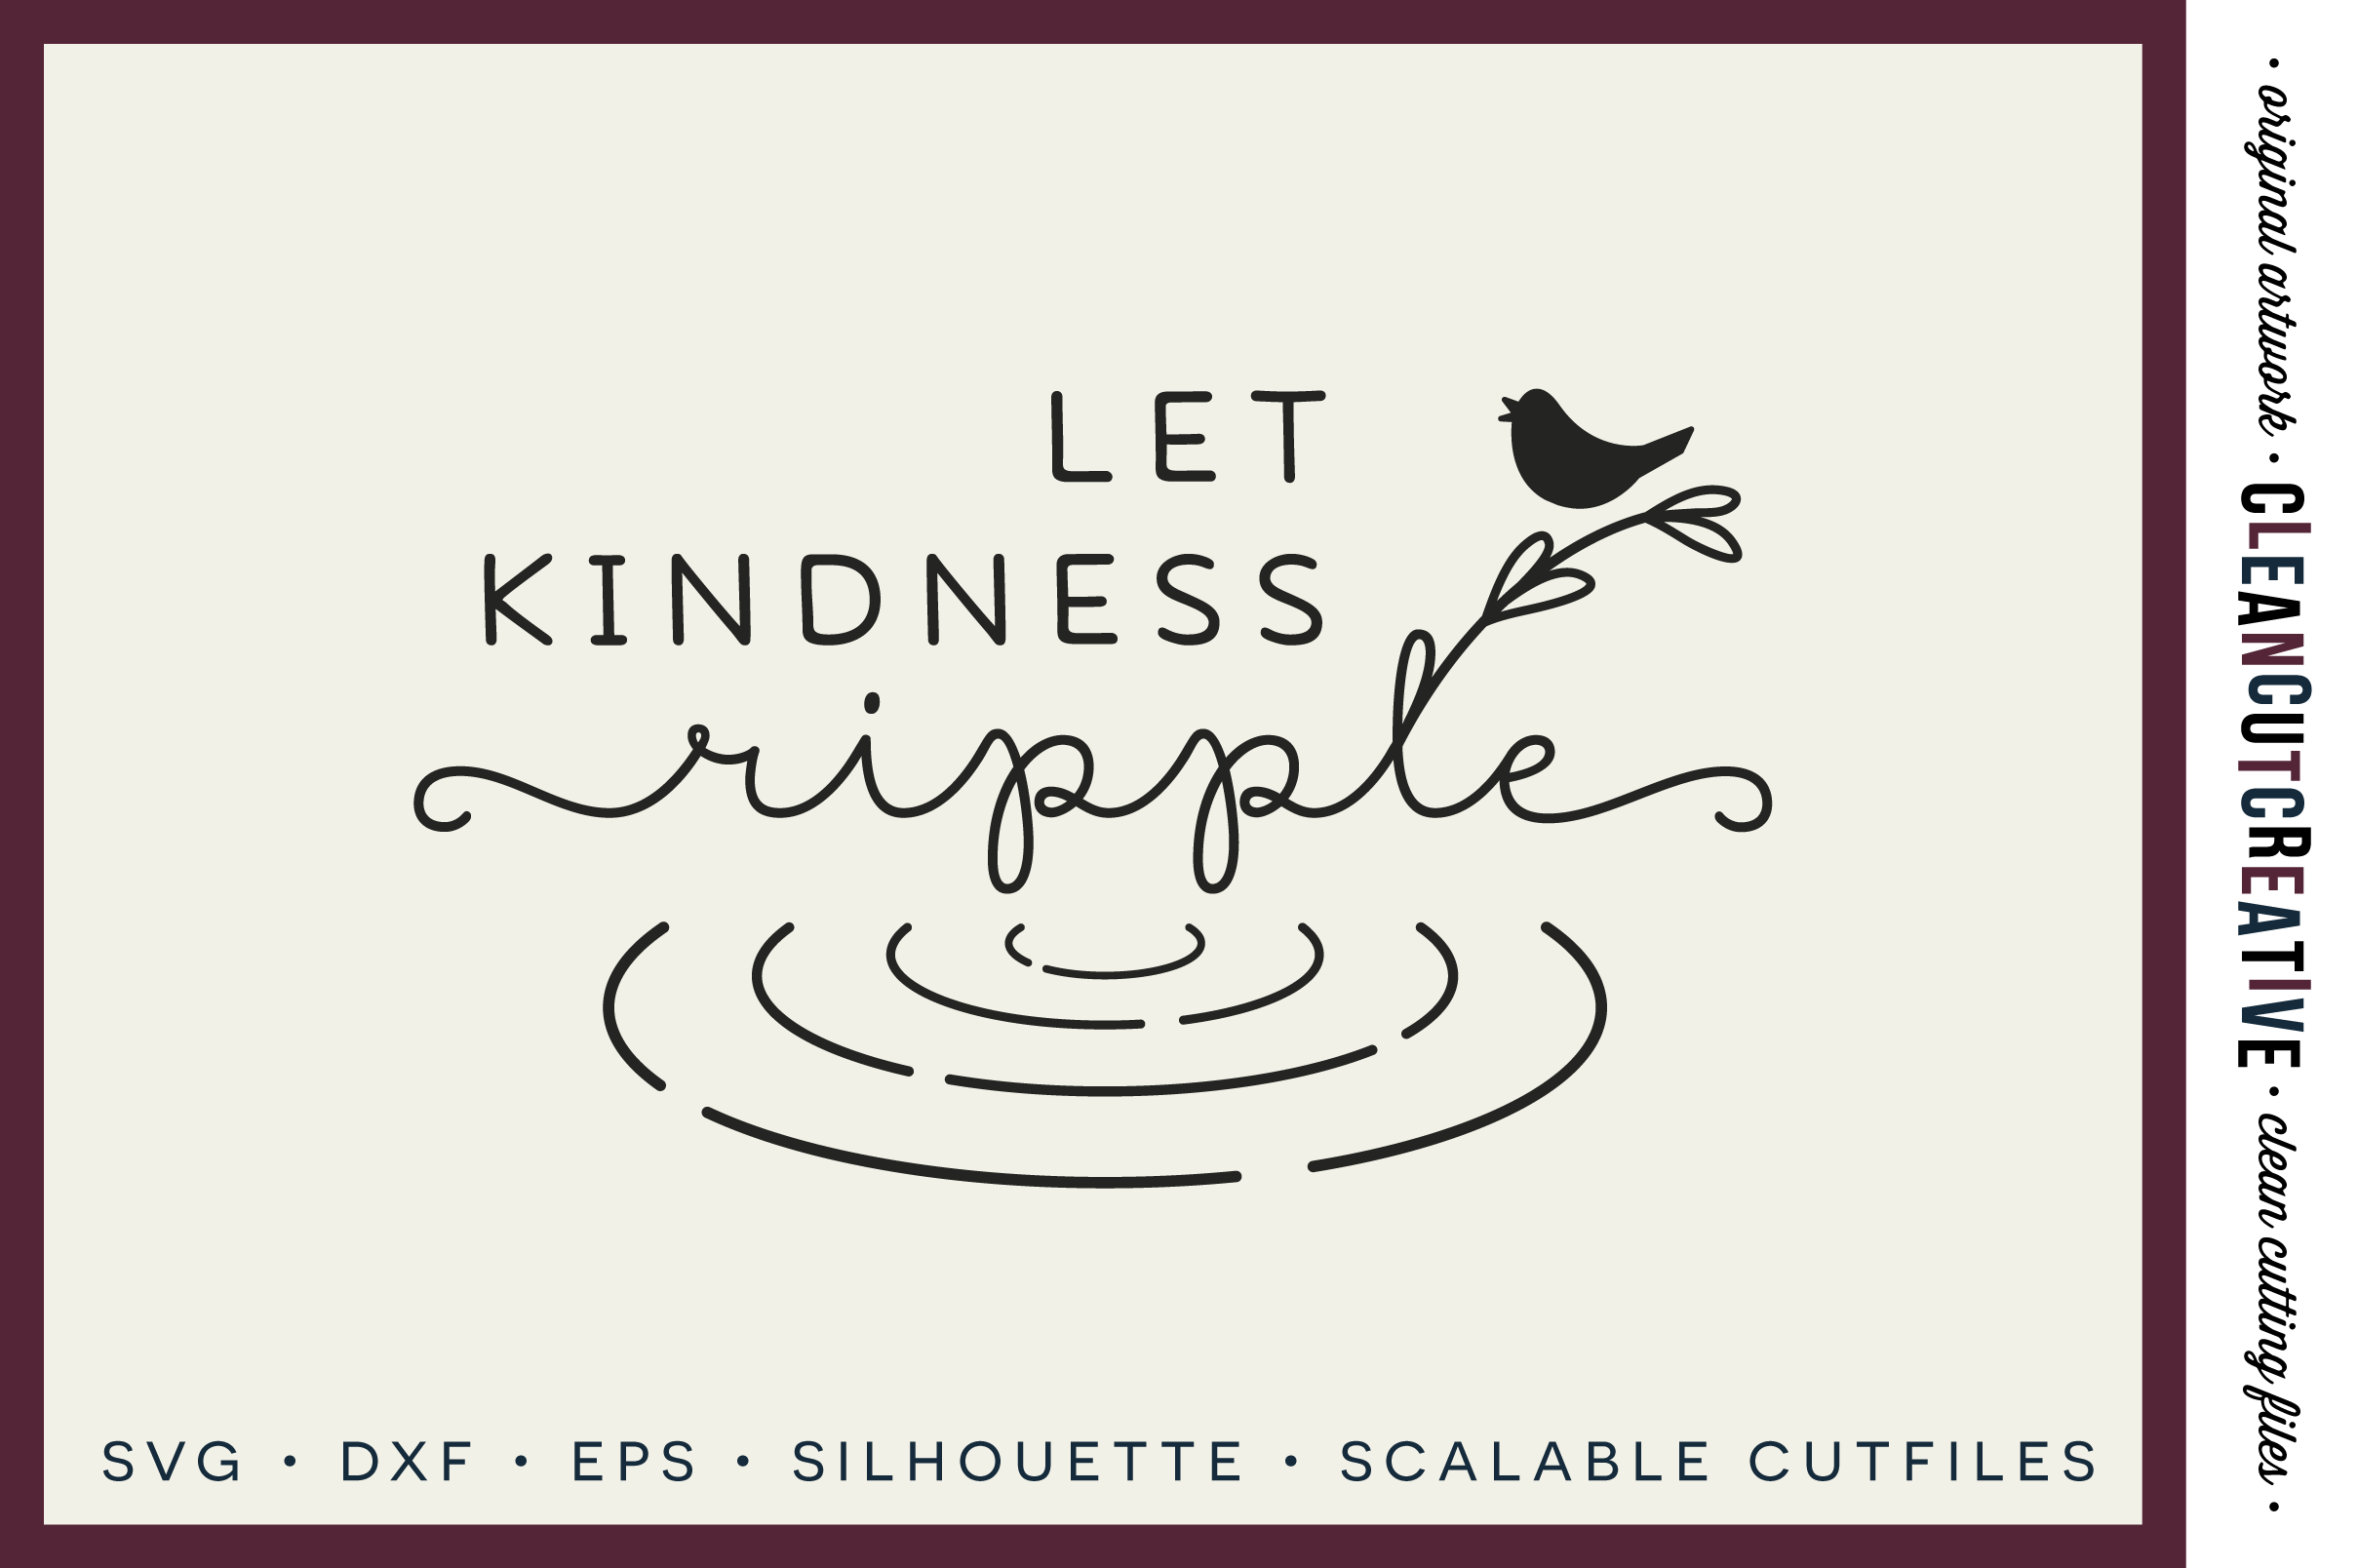 Download Inspiring Quote - Let Kindness Ripple - SVG DXF EPS PNG - cut file cutting file clipart - Cricut ...